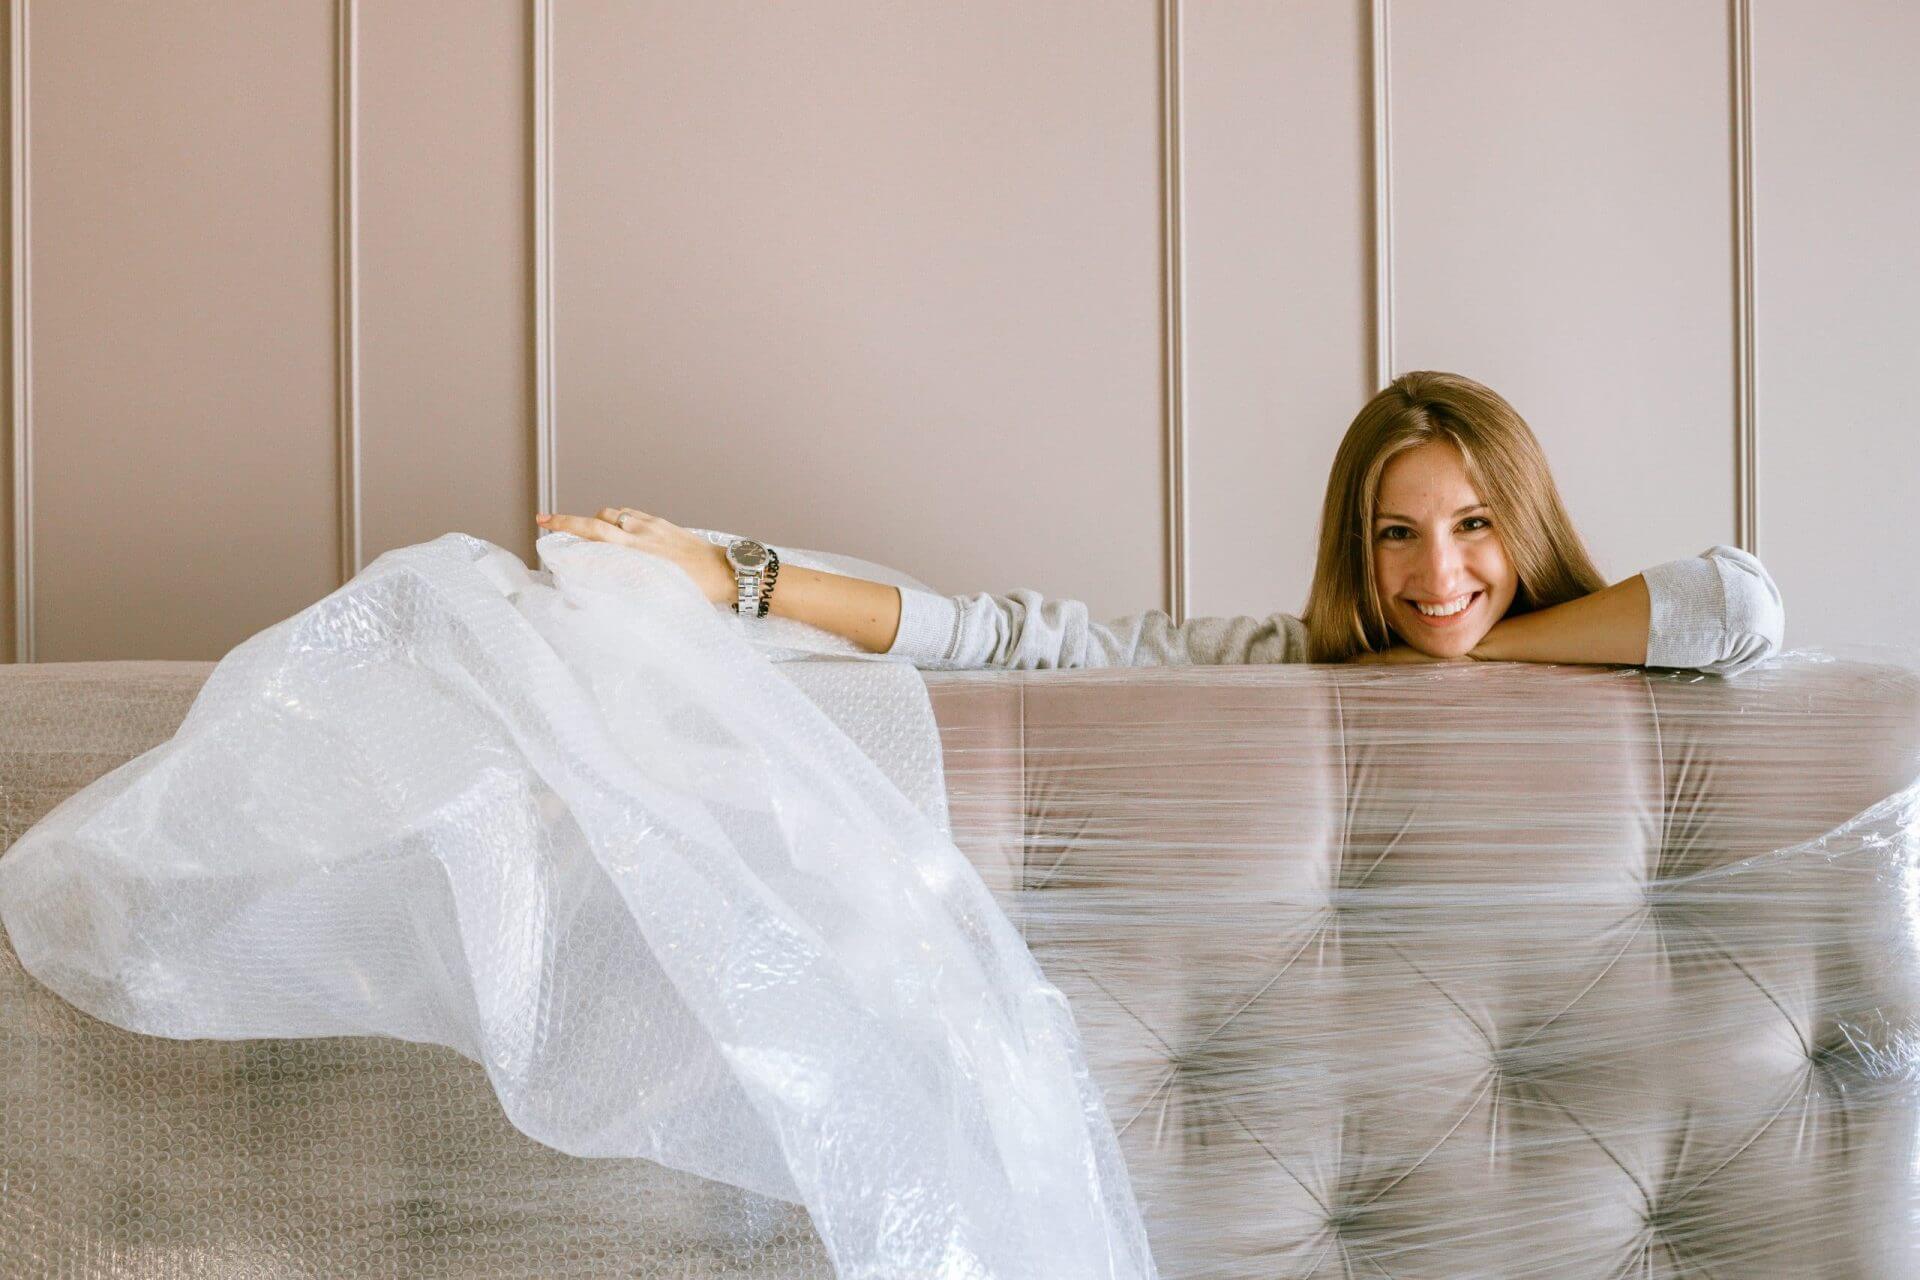 A woman leaning on a couch covered in plastic